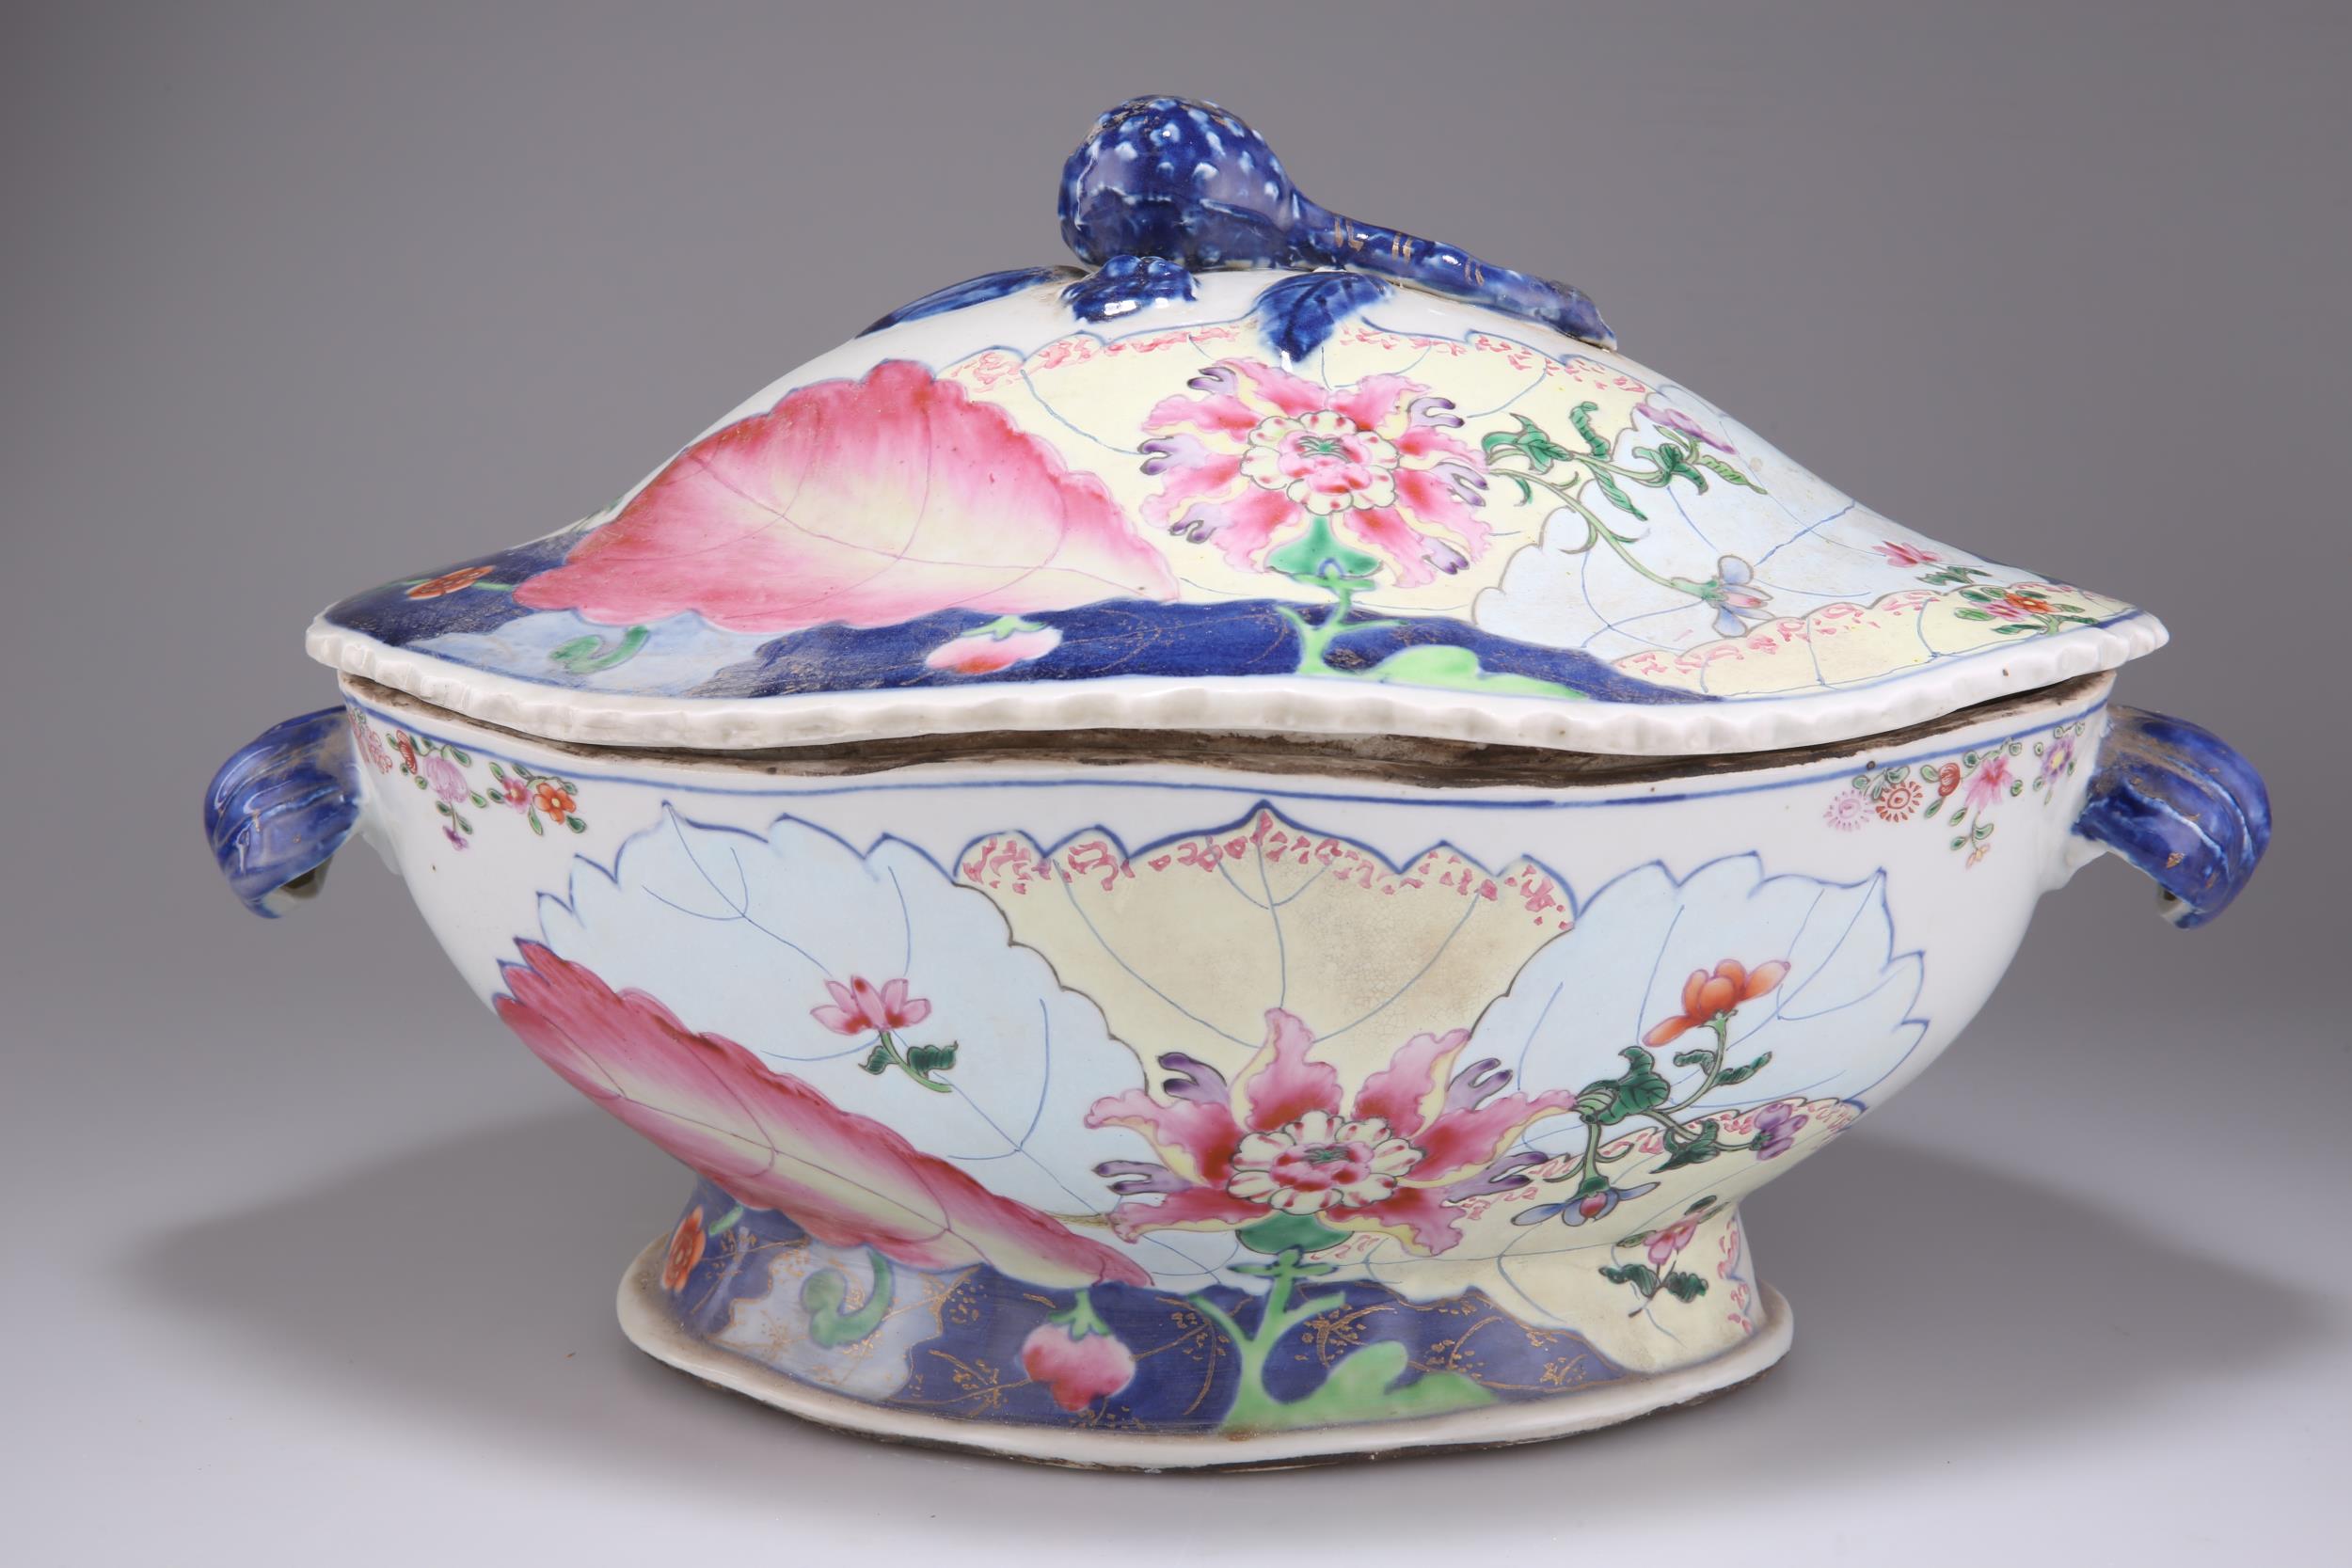 A TOBACCO LEAF TUREEN AND COVER, IN CHINESE EXPORT STYLE